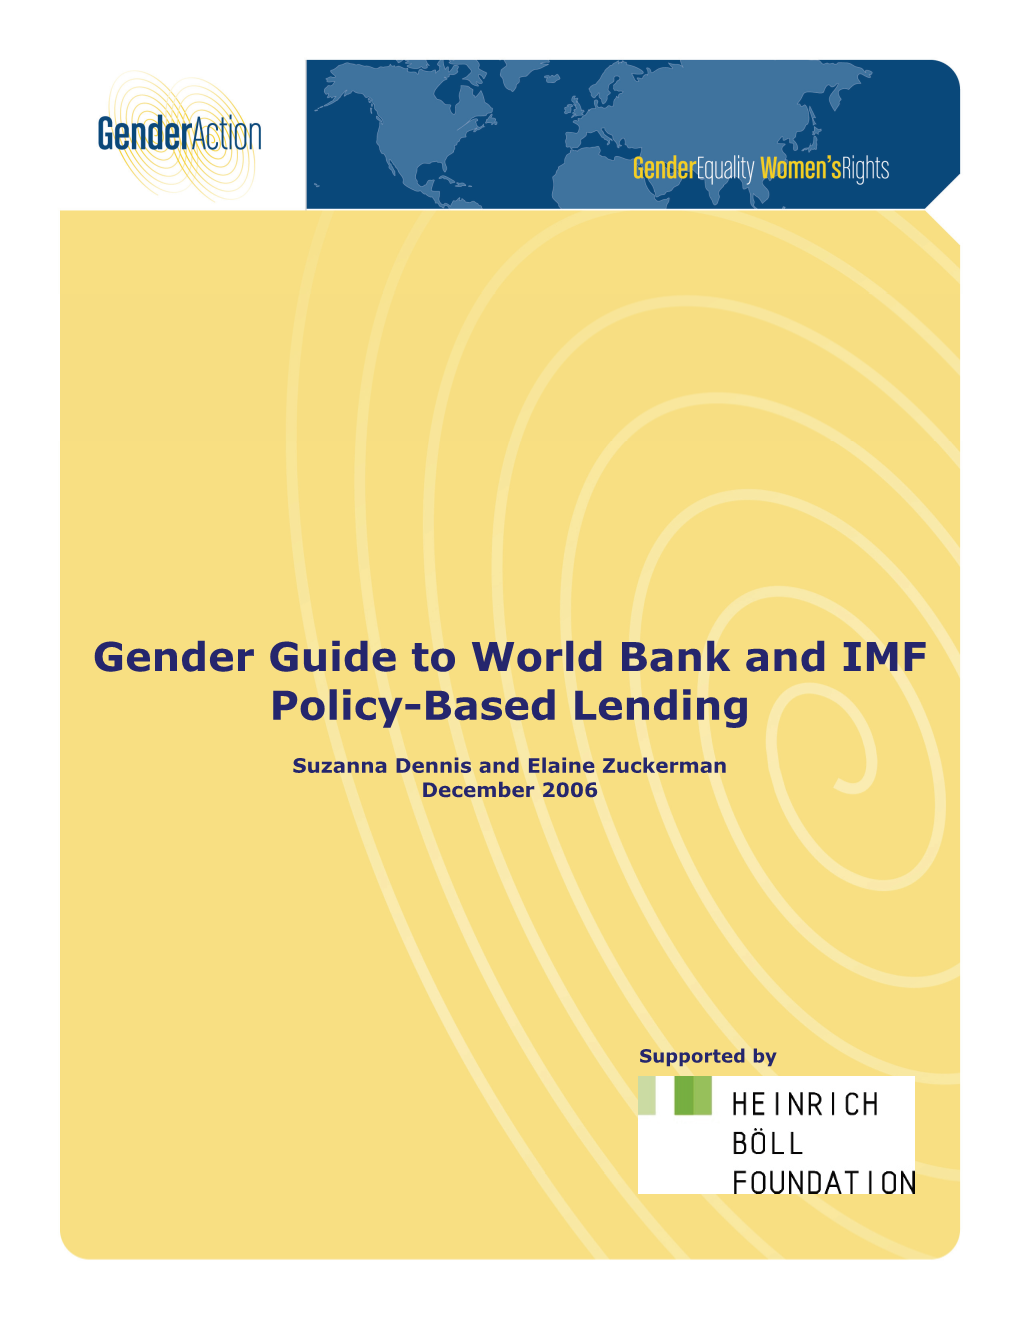 Gender Guide to World Bank and IMF Policy-Based Lending